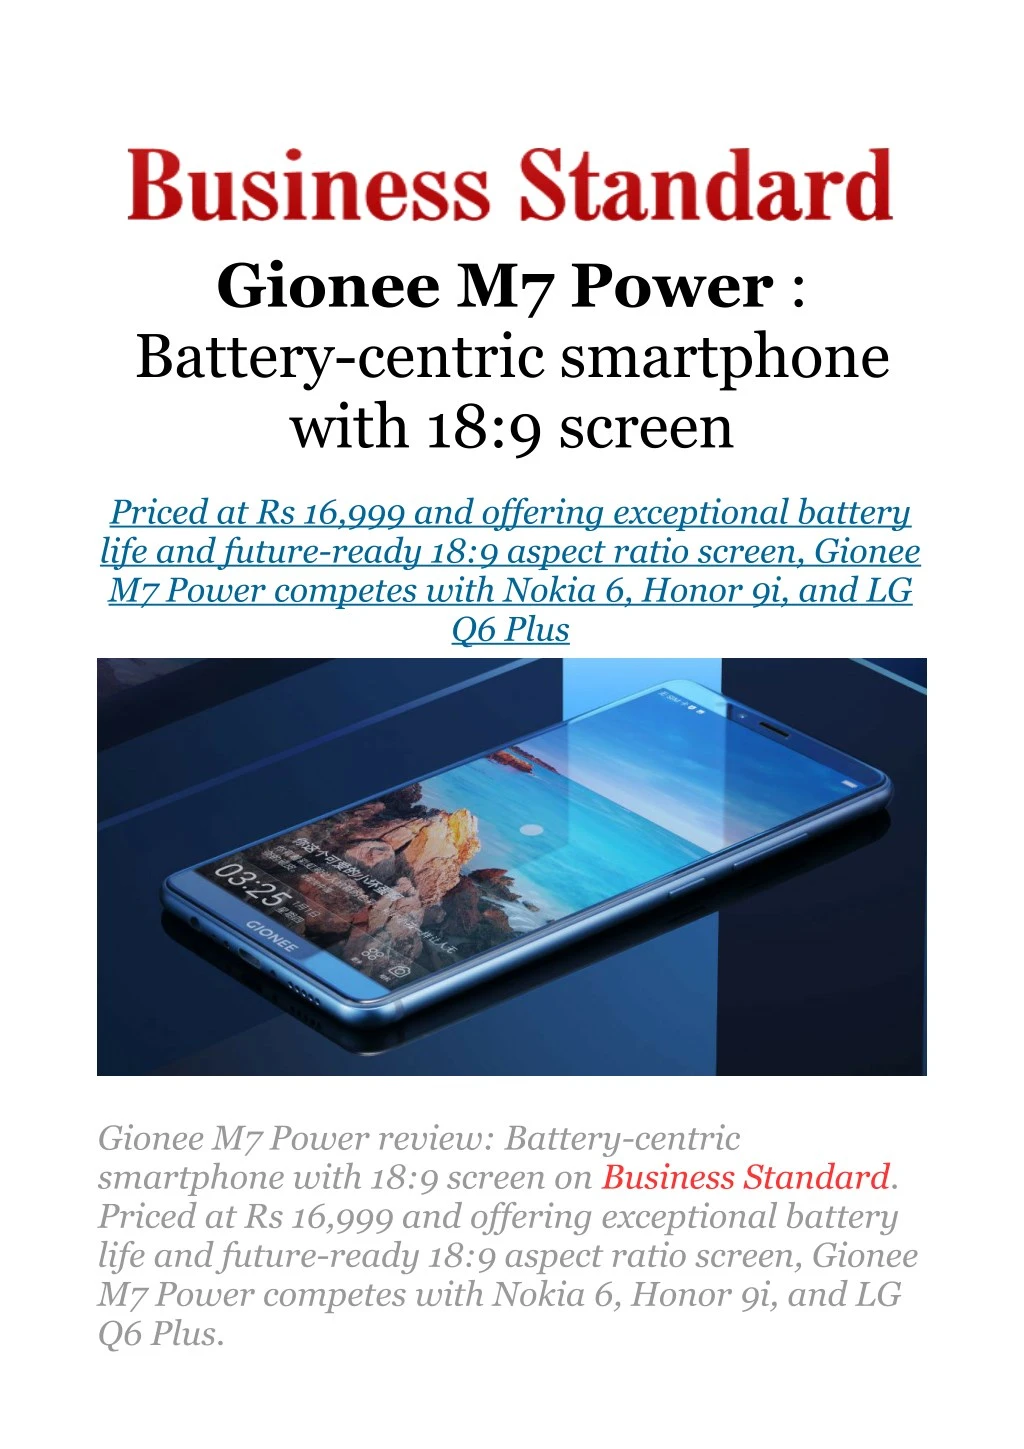 gionee m7 power battery centric smartphone with